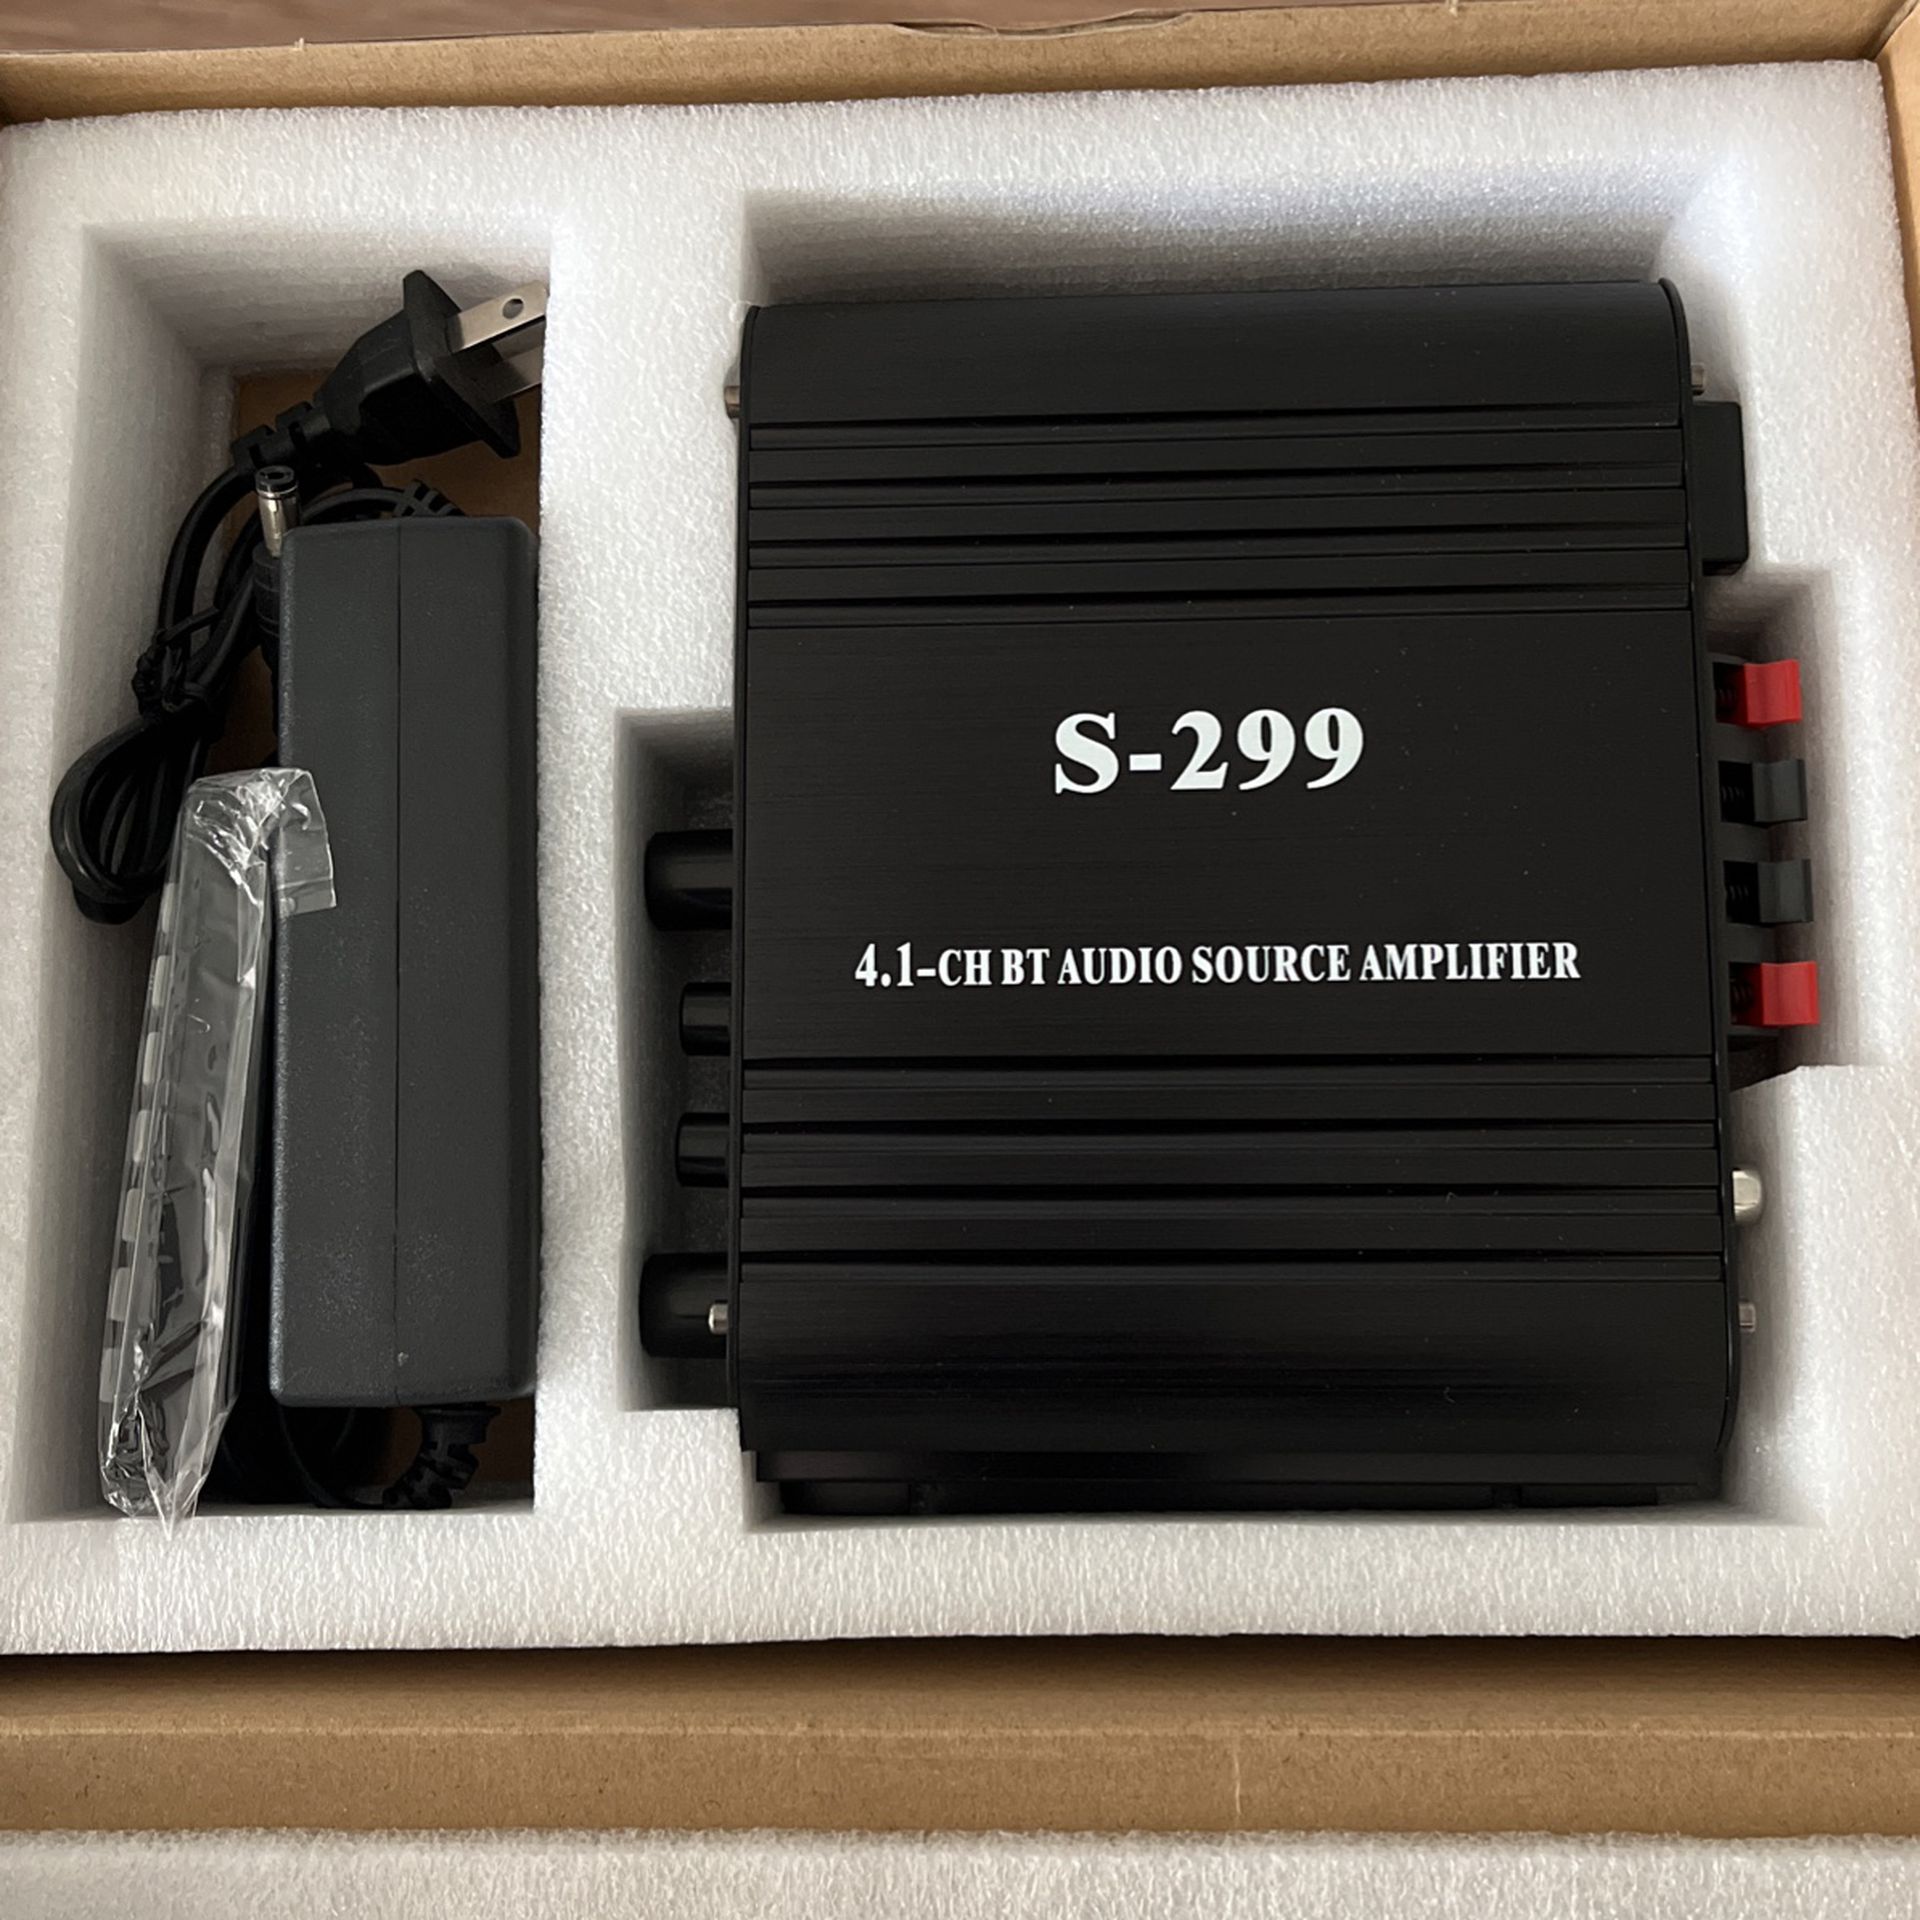 S-299. 4.1 -CH BT AUDIO SOUCE AMPLIFIER NEW IN OPEN BOX See All Photos